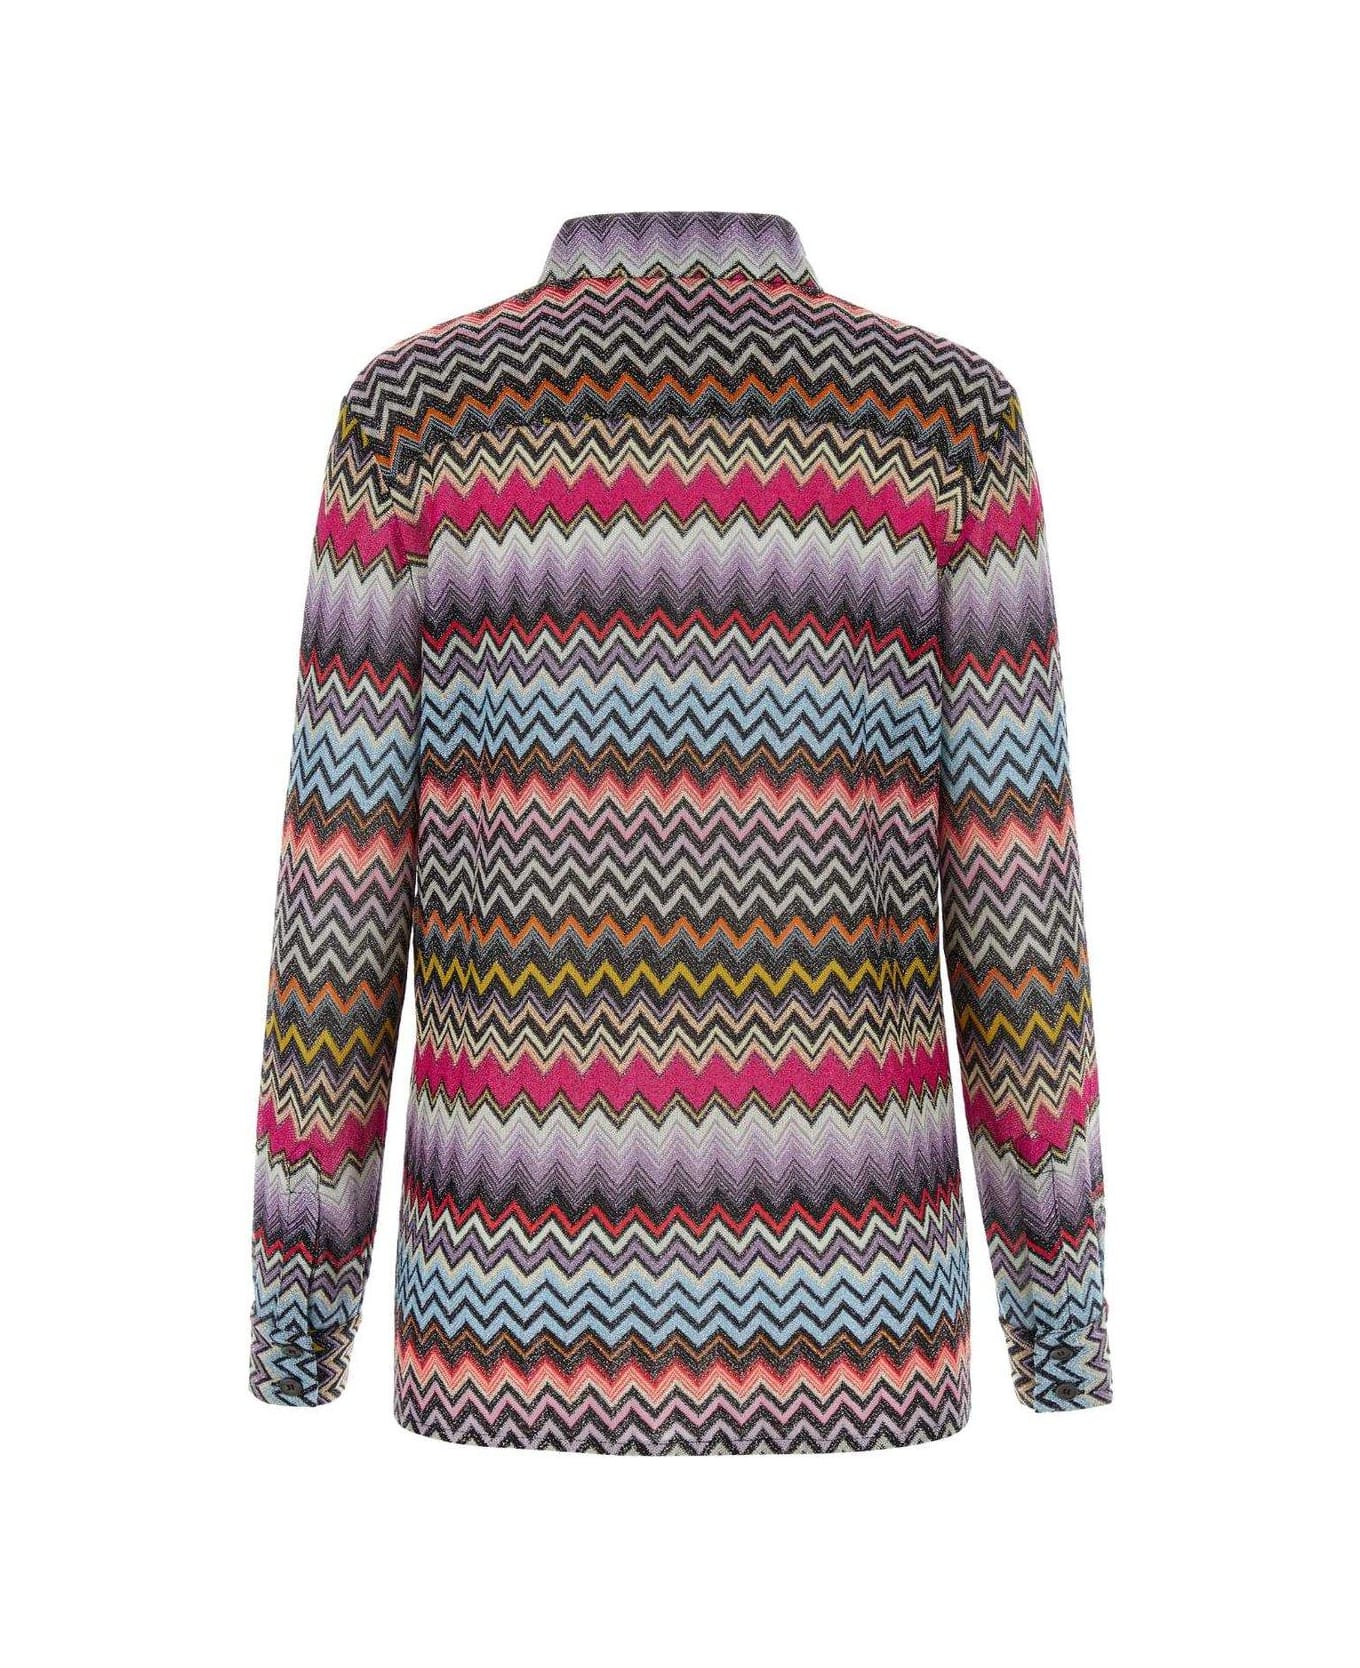 Missoni Patternede Embroidered Button-up Long-sleeved Shirt - Multicolor